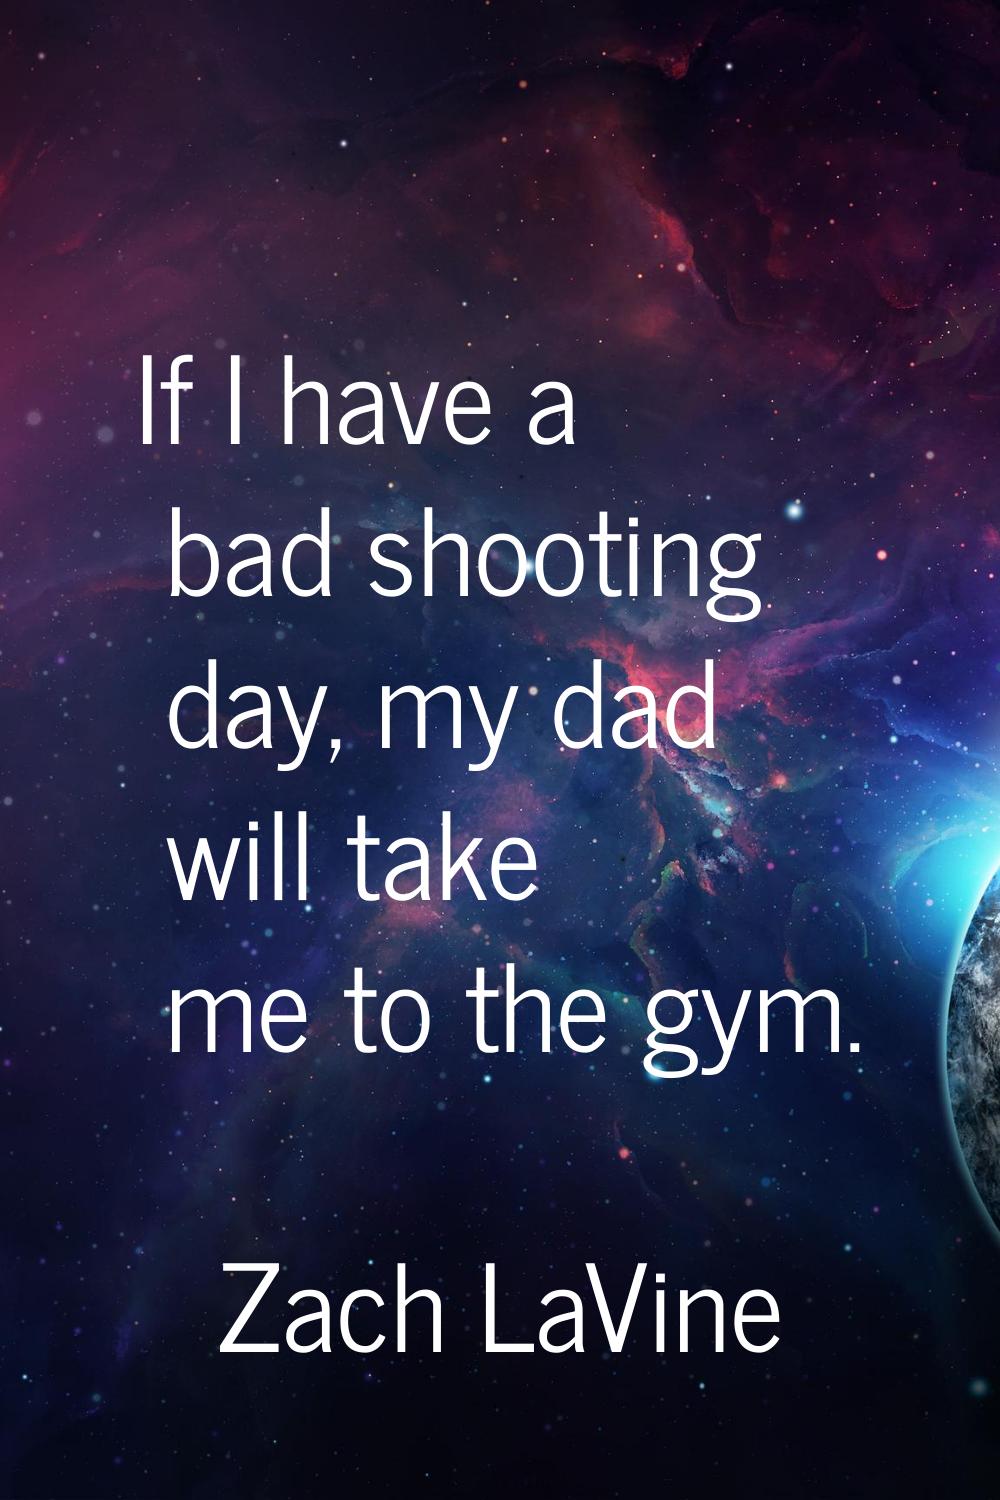 If I have a bad shooting day, my dad will take me to the gym.